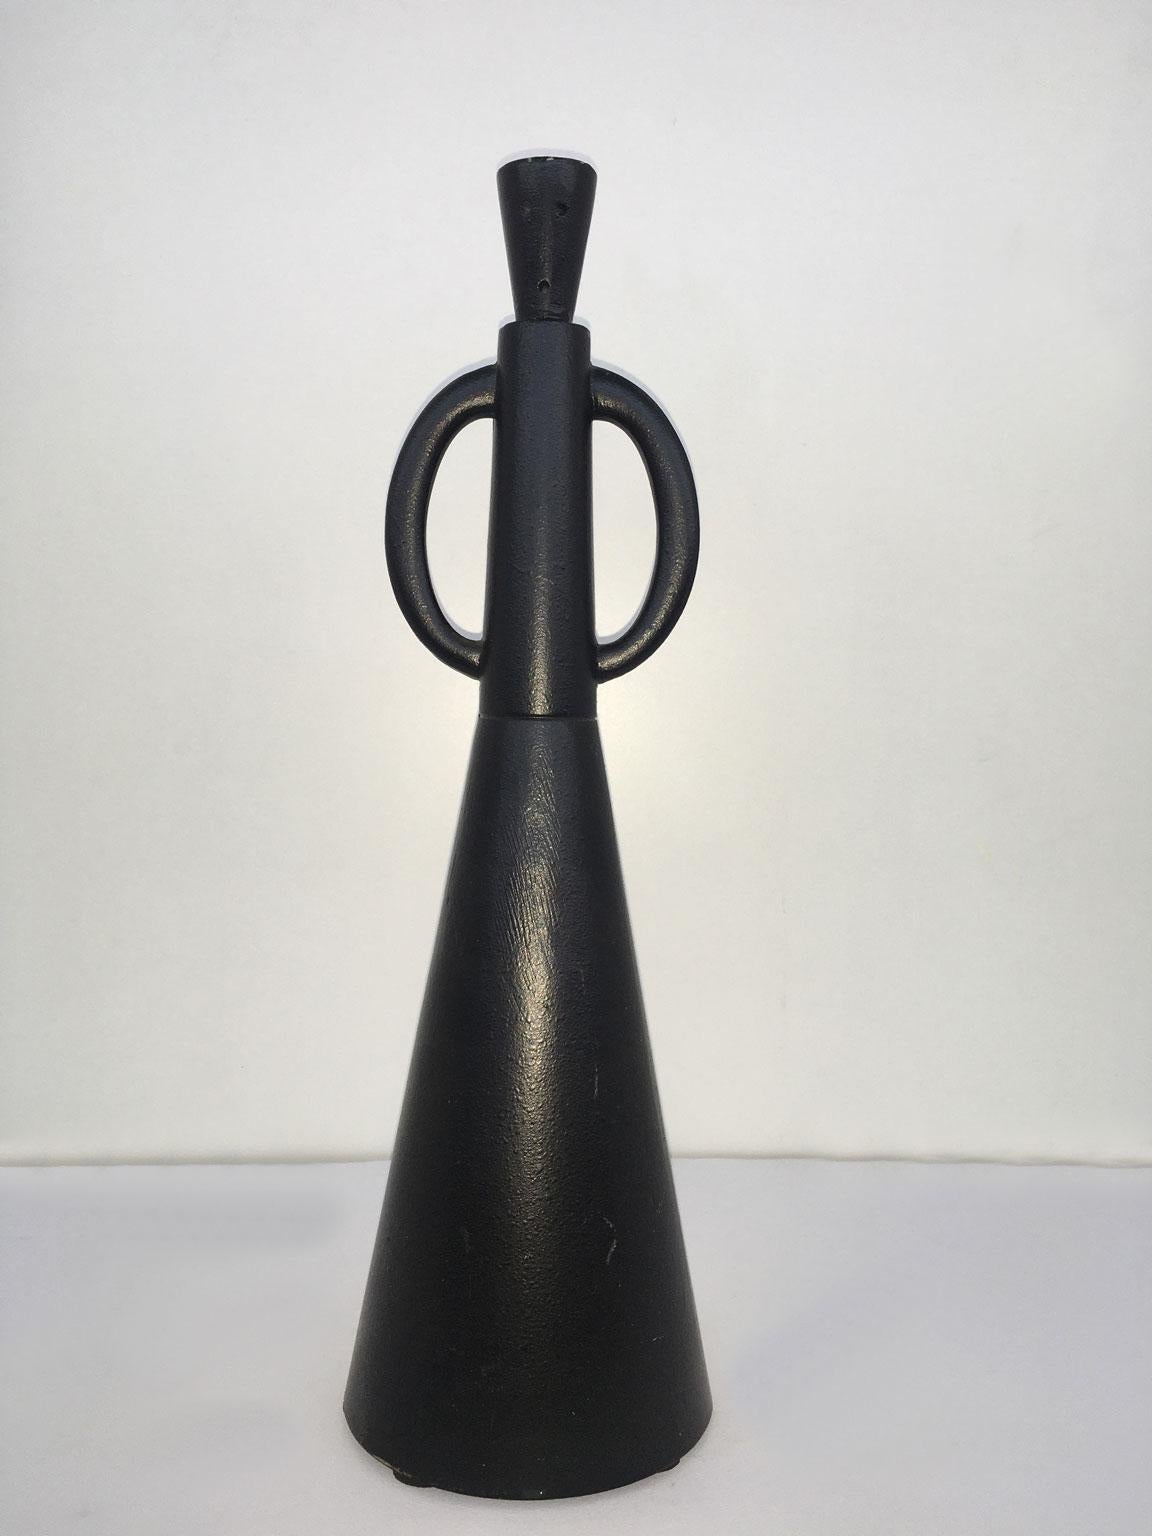 1980 Italy Post-Modern Alessandro Guerriero Abstract Sculpture Portabuono Quo For Sale 9